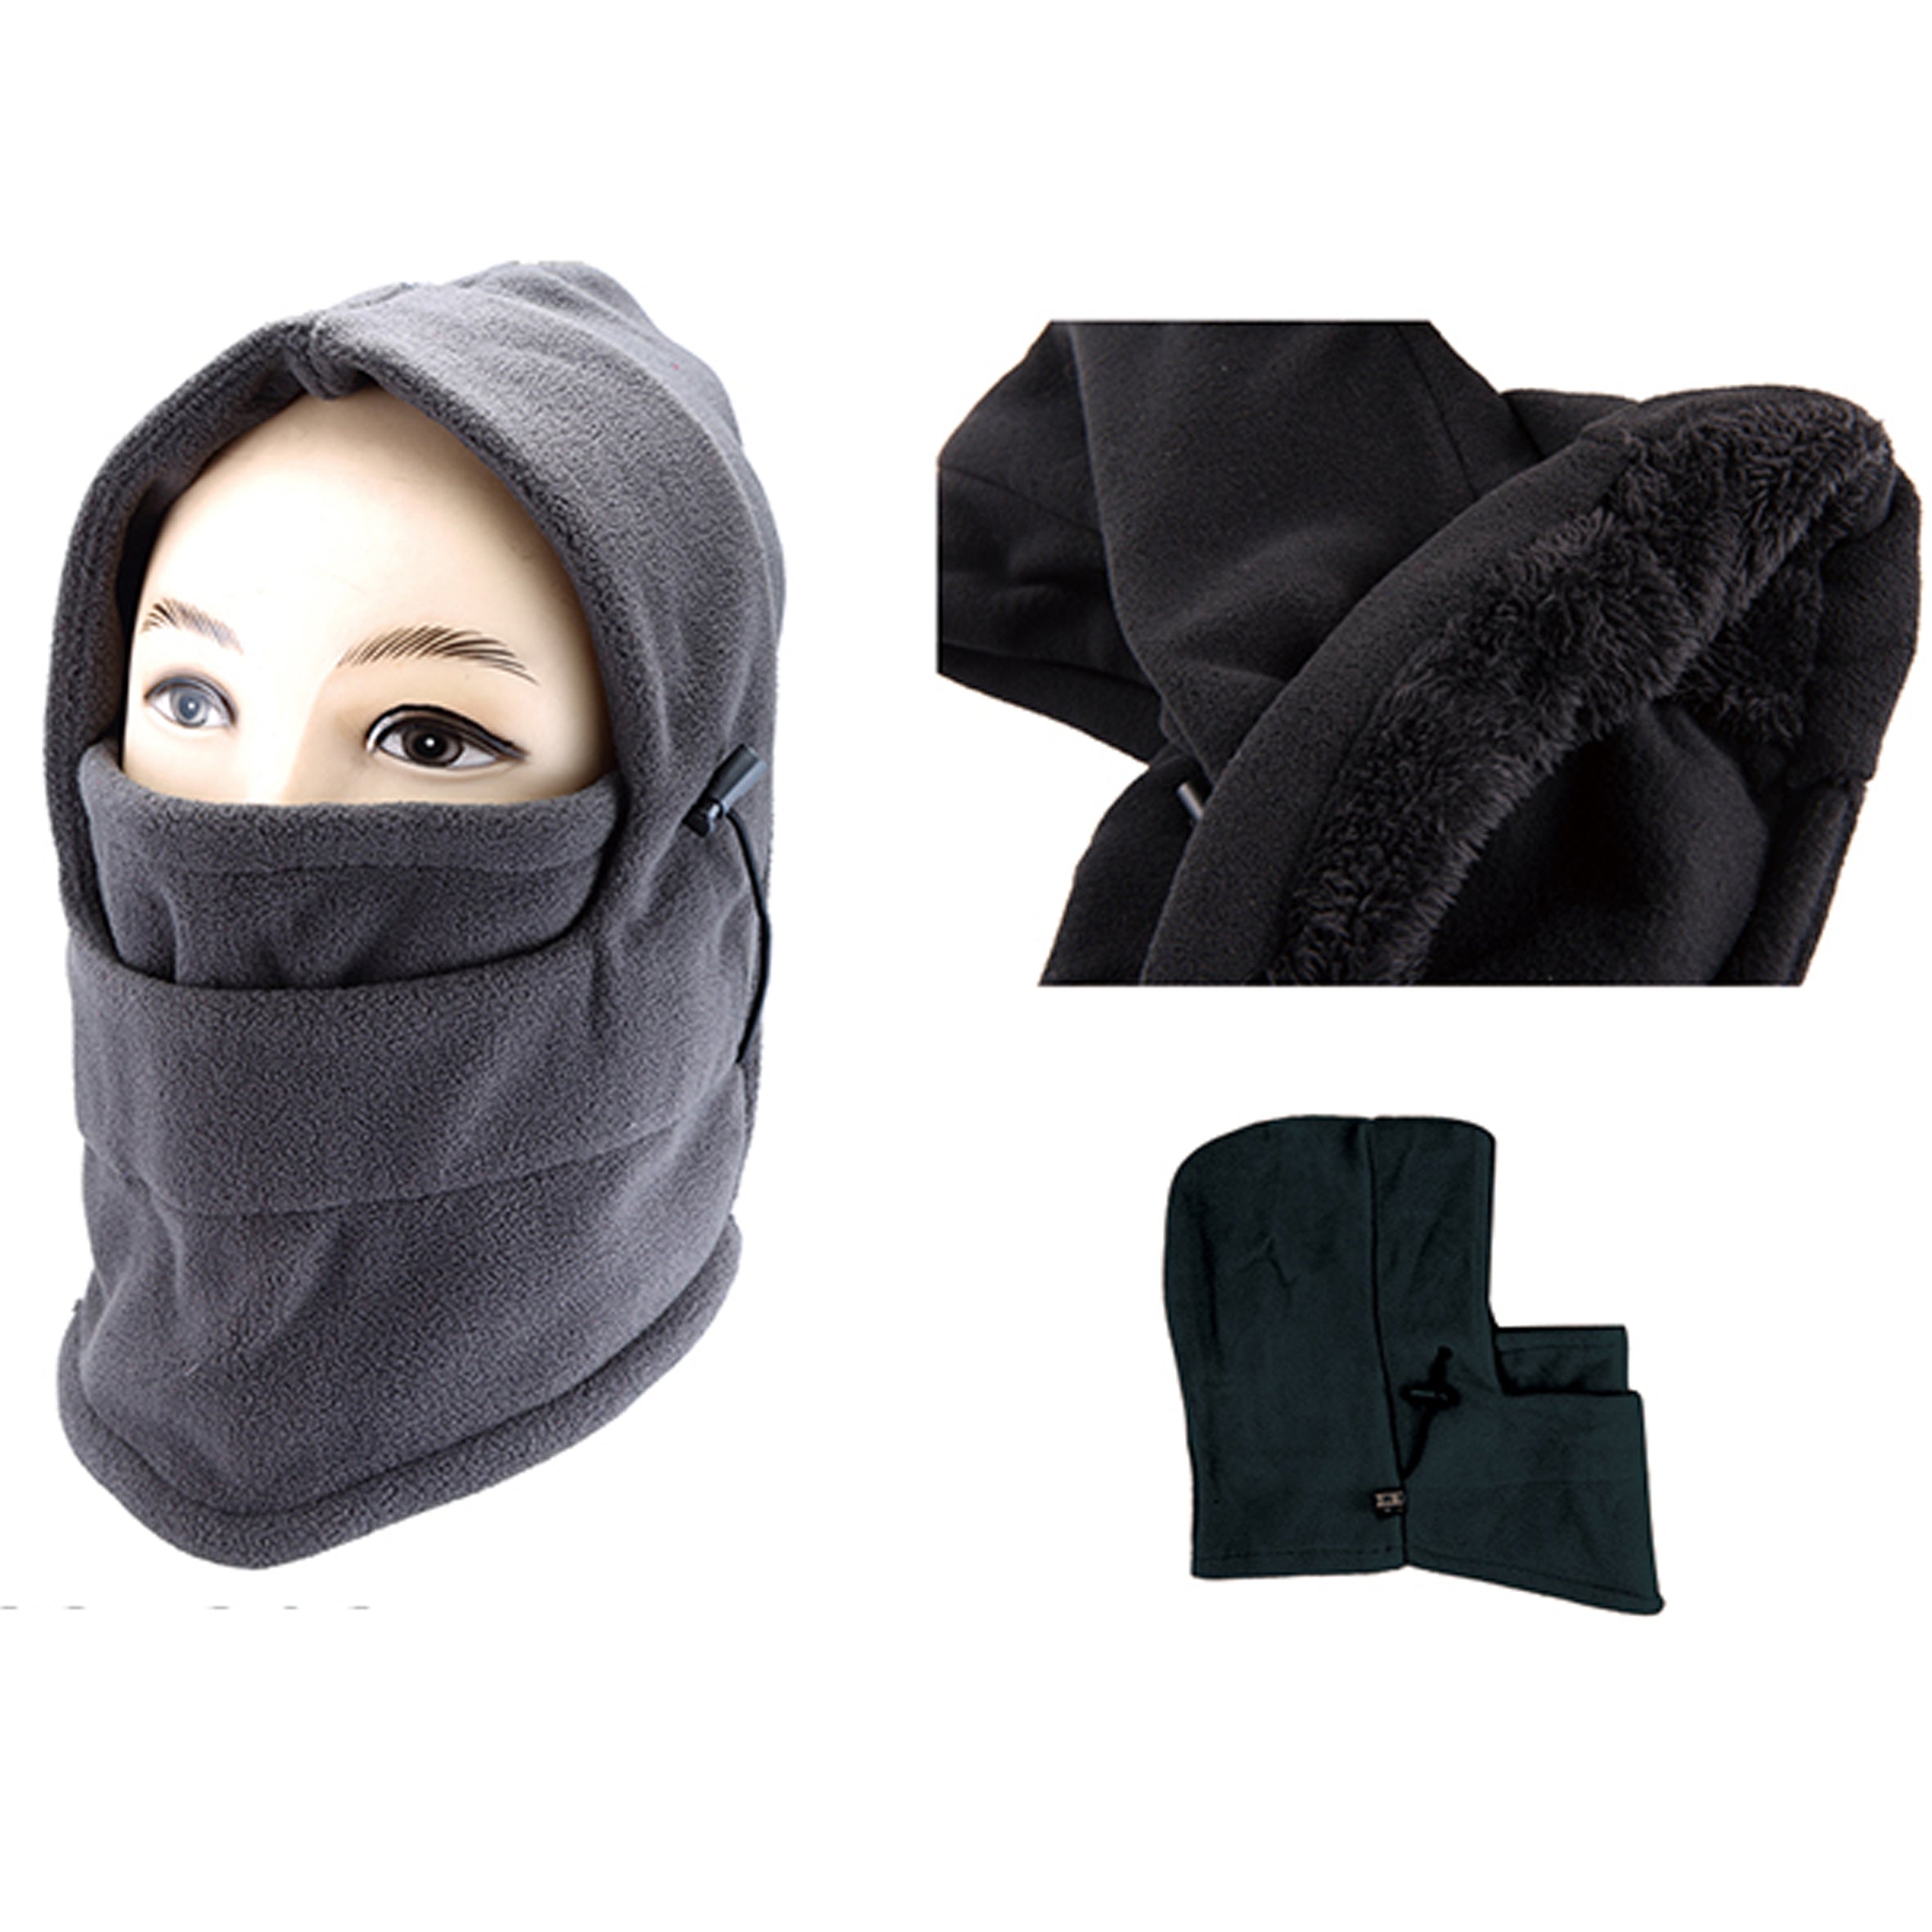 Wholesale CLOTHING Accessories Multi-Purpose Windproof Hood Black With Fur Inside NH202